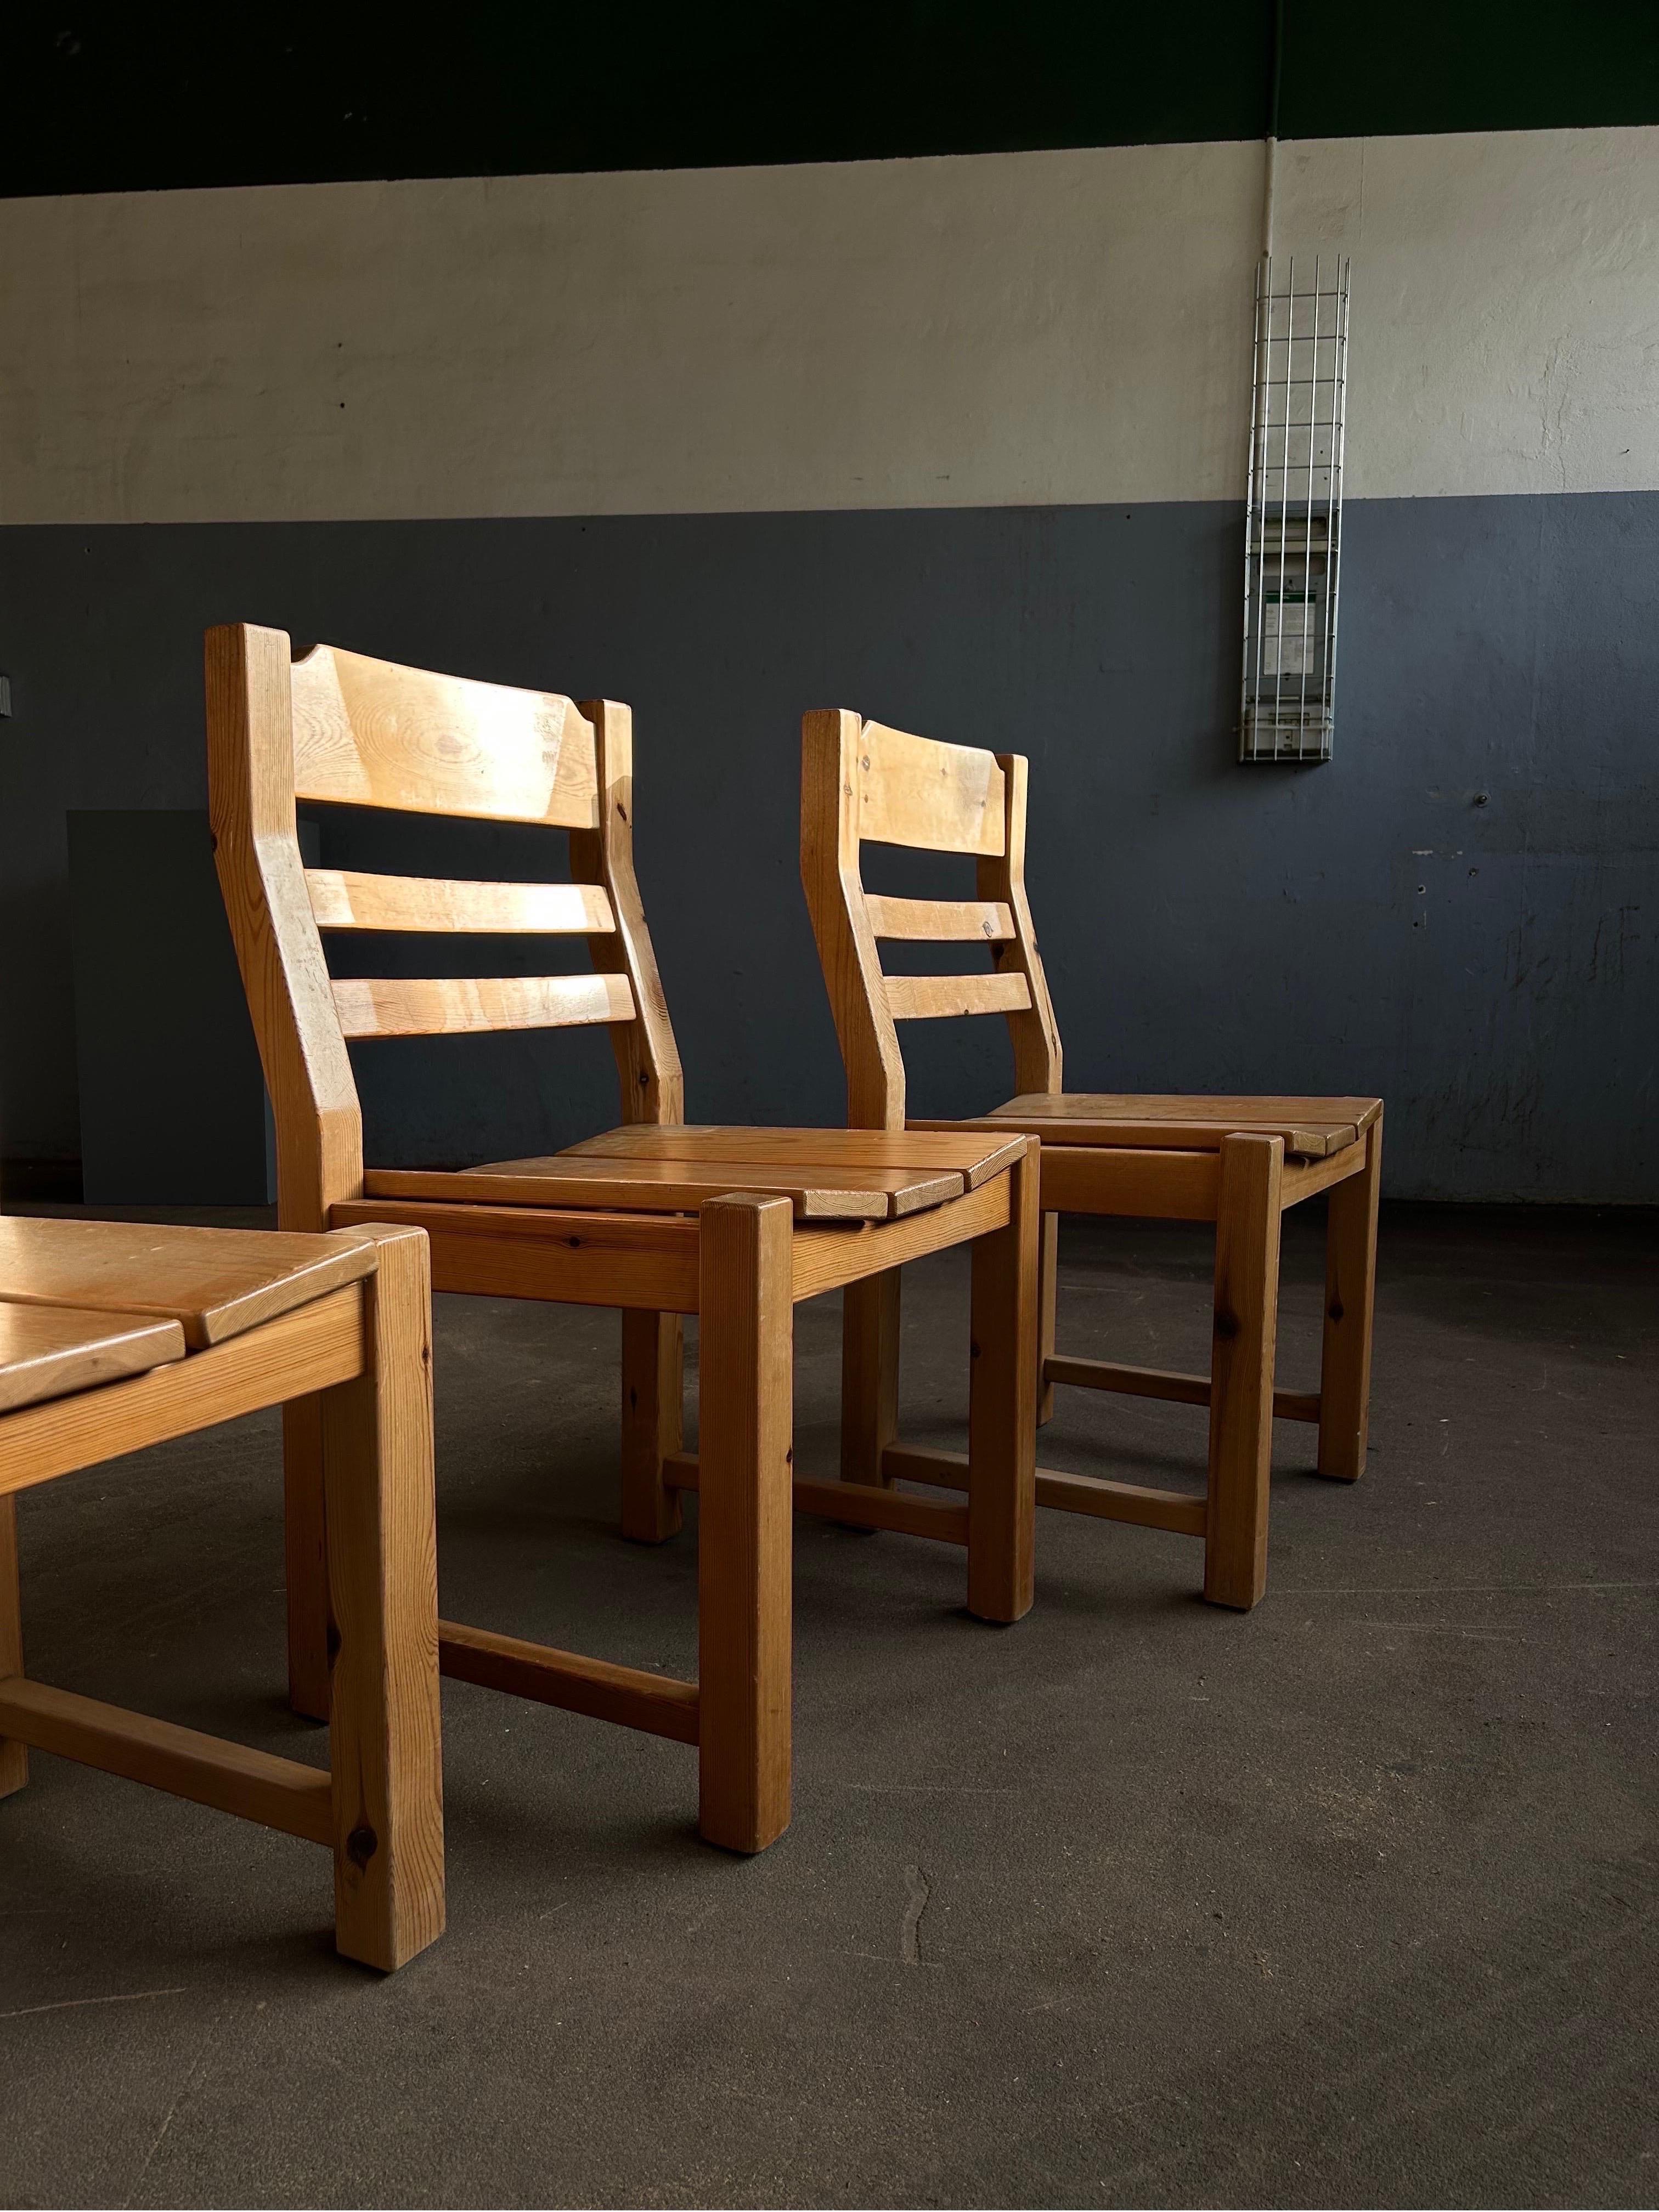 Set of four brutalist pine dining chairs manufactured in Denmark in the 1970’s.
Perfect chairs in any interior from a modern interior to a more traditional interior to a Wabi Sabi style interior.

The chairs are made in solid pine which has